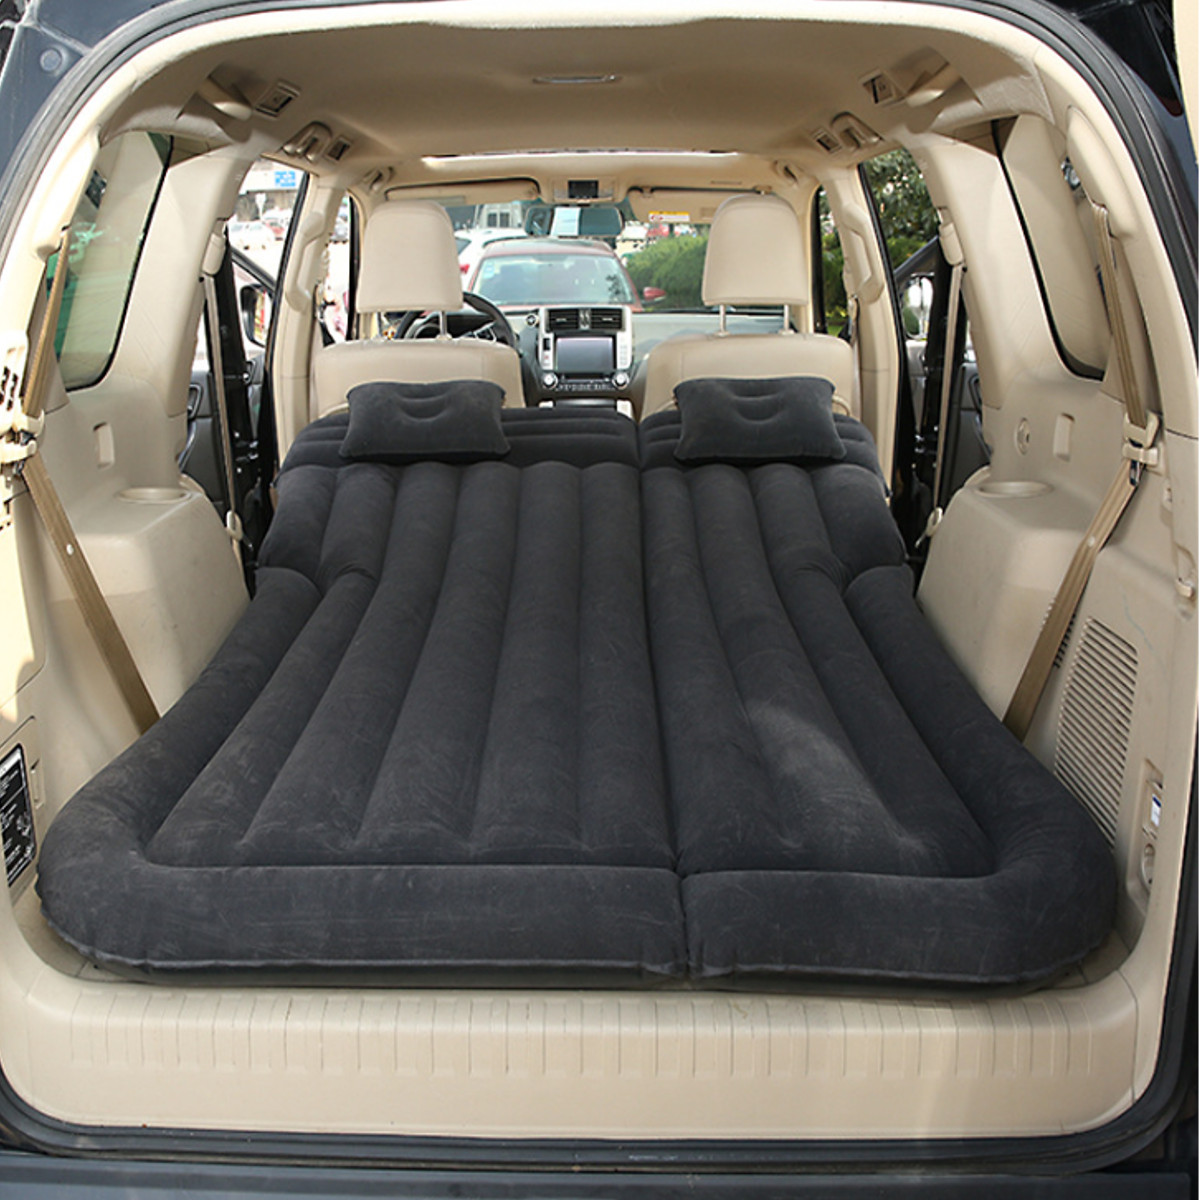 180x130cm-Multifunctional-Inflatable-Car-Air-Mattress-Durable-Back-Seat-Cover-Travel-Bed-Moisture-pr-1888970-4